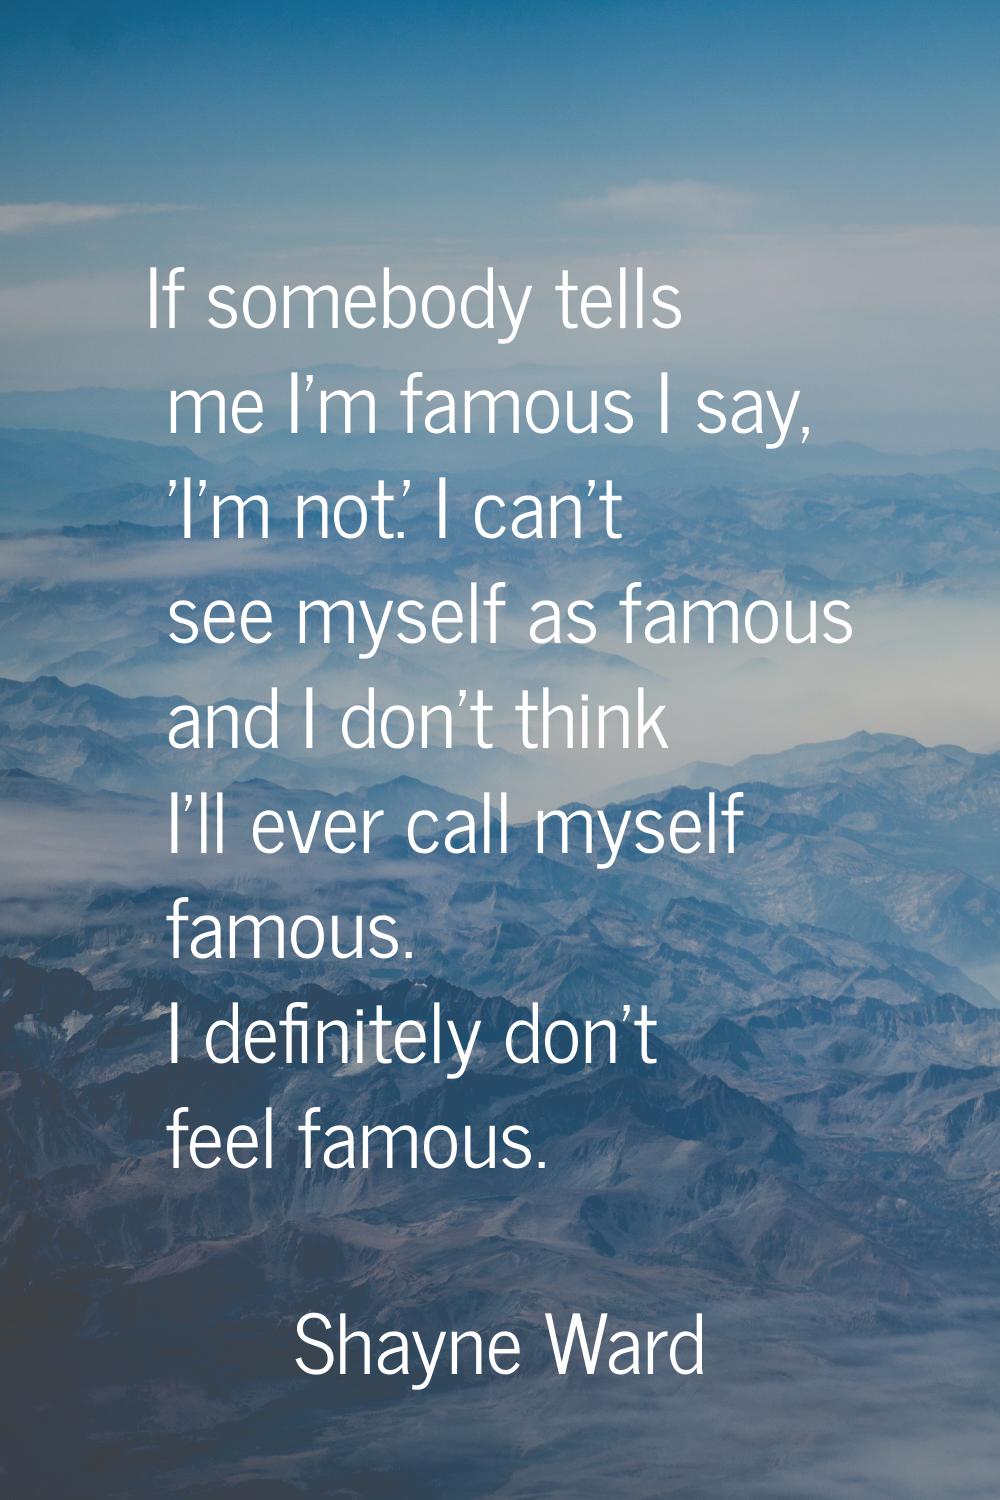 If somebody tells me I'm famous I say, 'I'm not.' I can't see myself as famous and I don't think I'